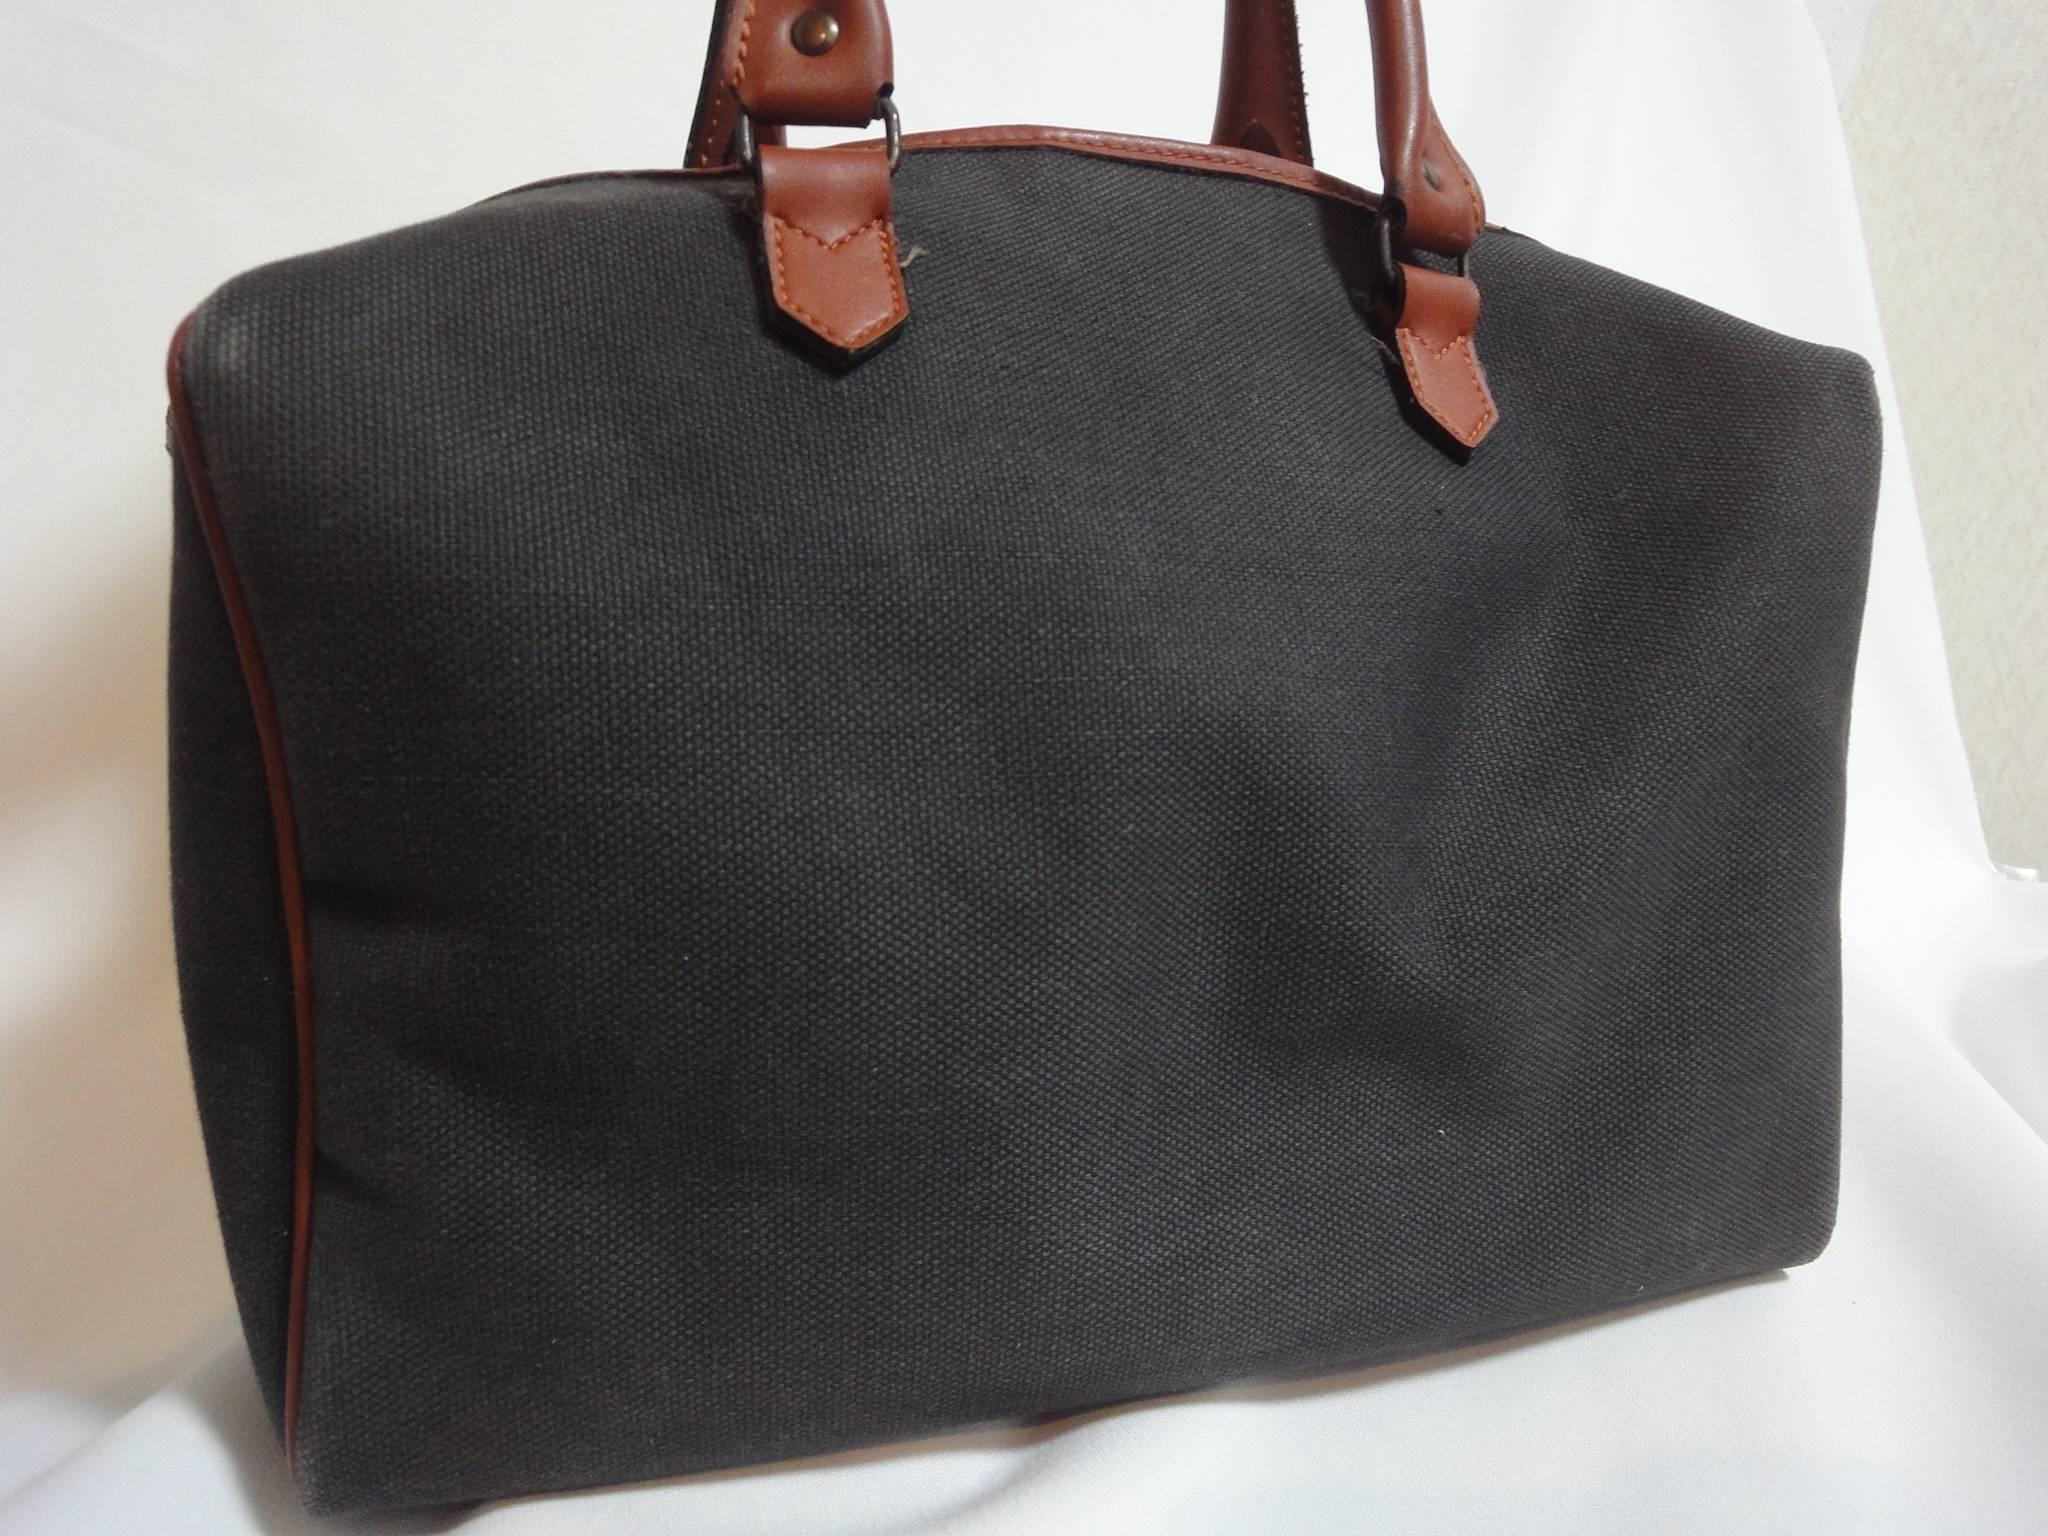 Vintage Yves Saint Laurent charcoal grey canvas and brown leather travel bag, daily use duffle purse. Classic unisex style YSL purse.

This is a vintage classic canvas and leather duffle bag from Yves Saint Laurent in approximately from the 80s.